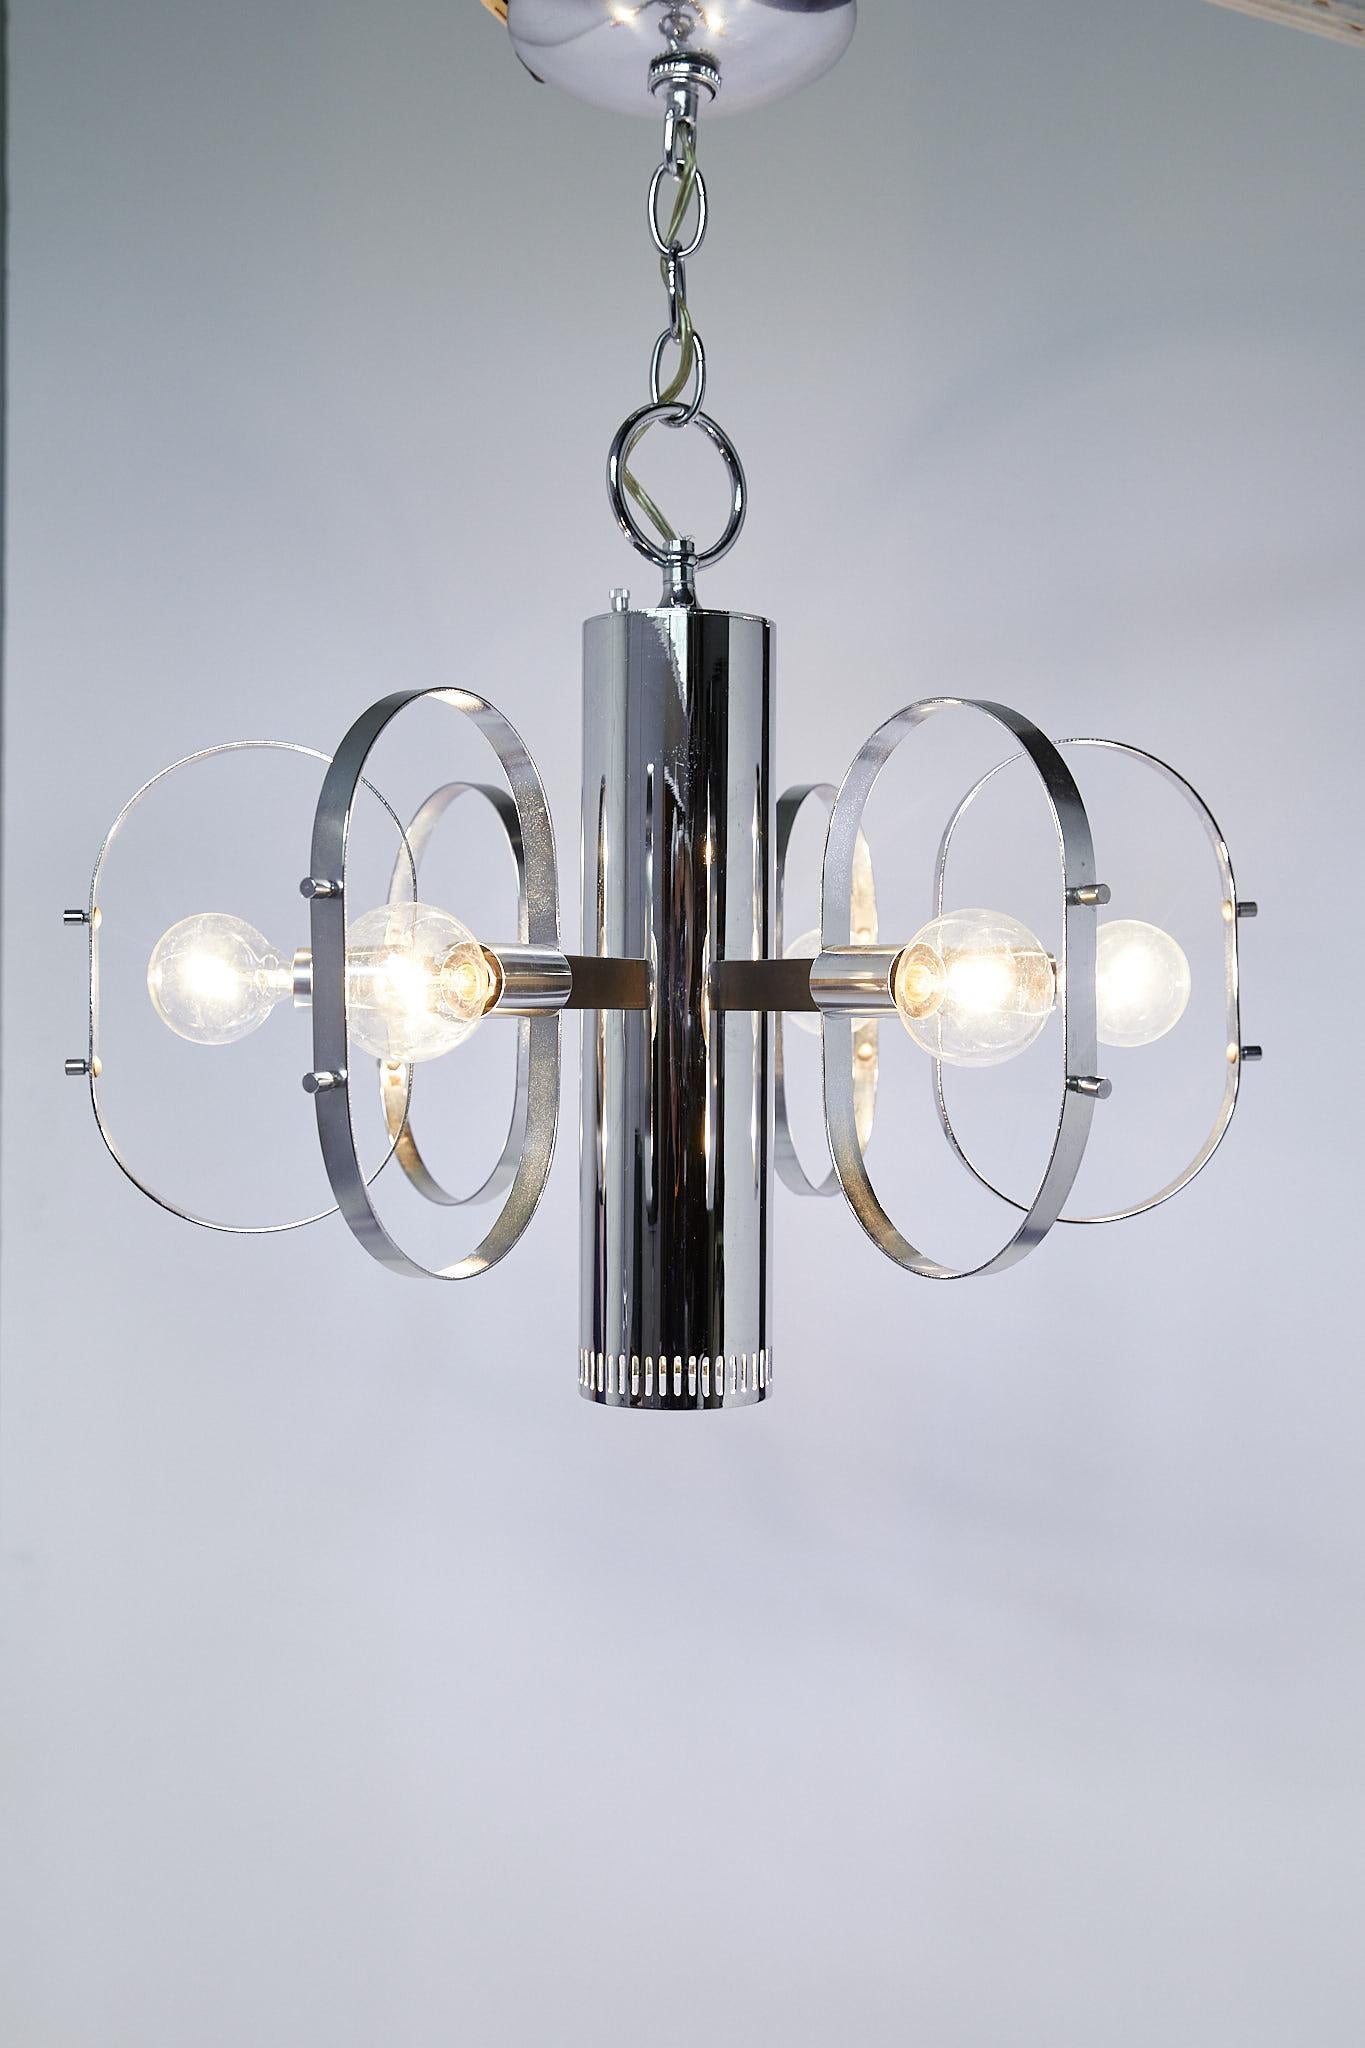 Great quality midcentury light fixture by Forecast Lighting having a tubular pendant with hidden downward facing light and six lights around the perimeter framed by metal orbs. The fixture is on a three way switch so that you can turn on the bottom